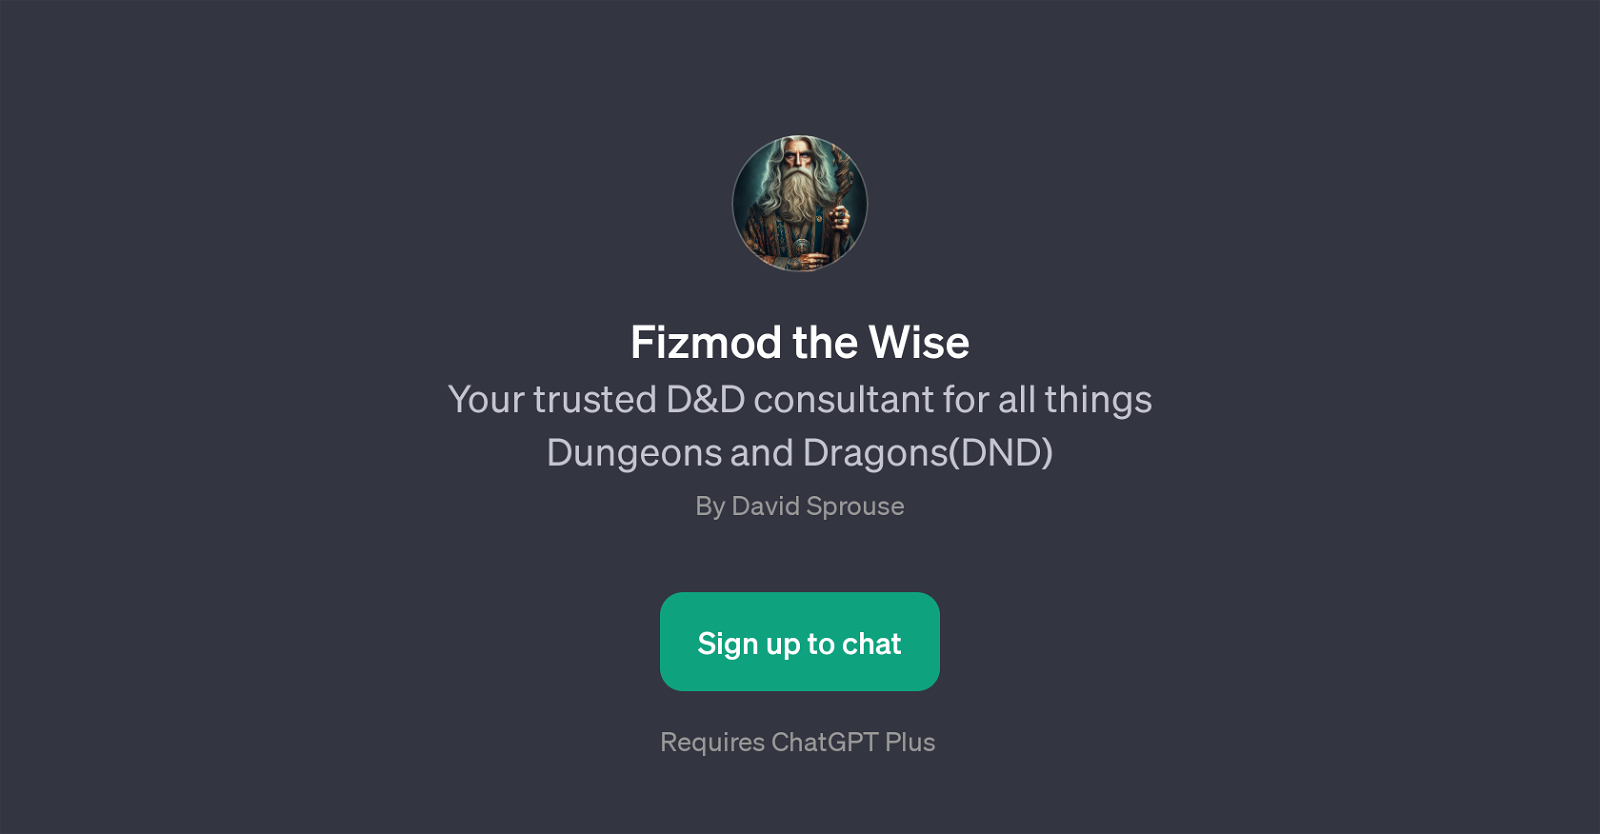 Fizmod the Wise website